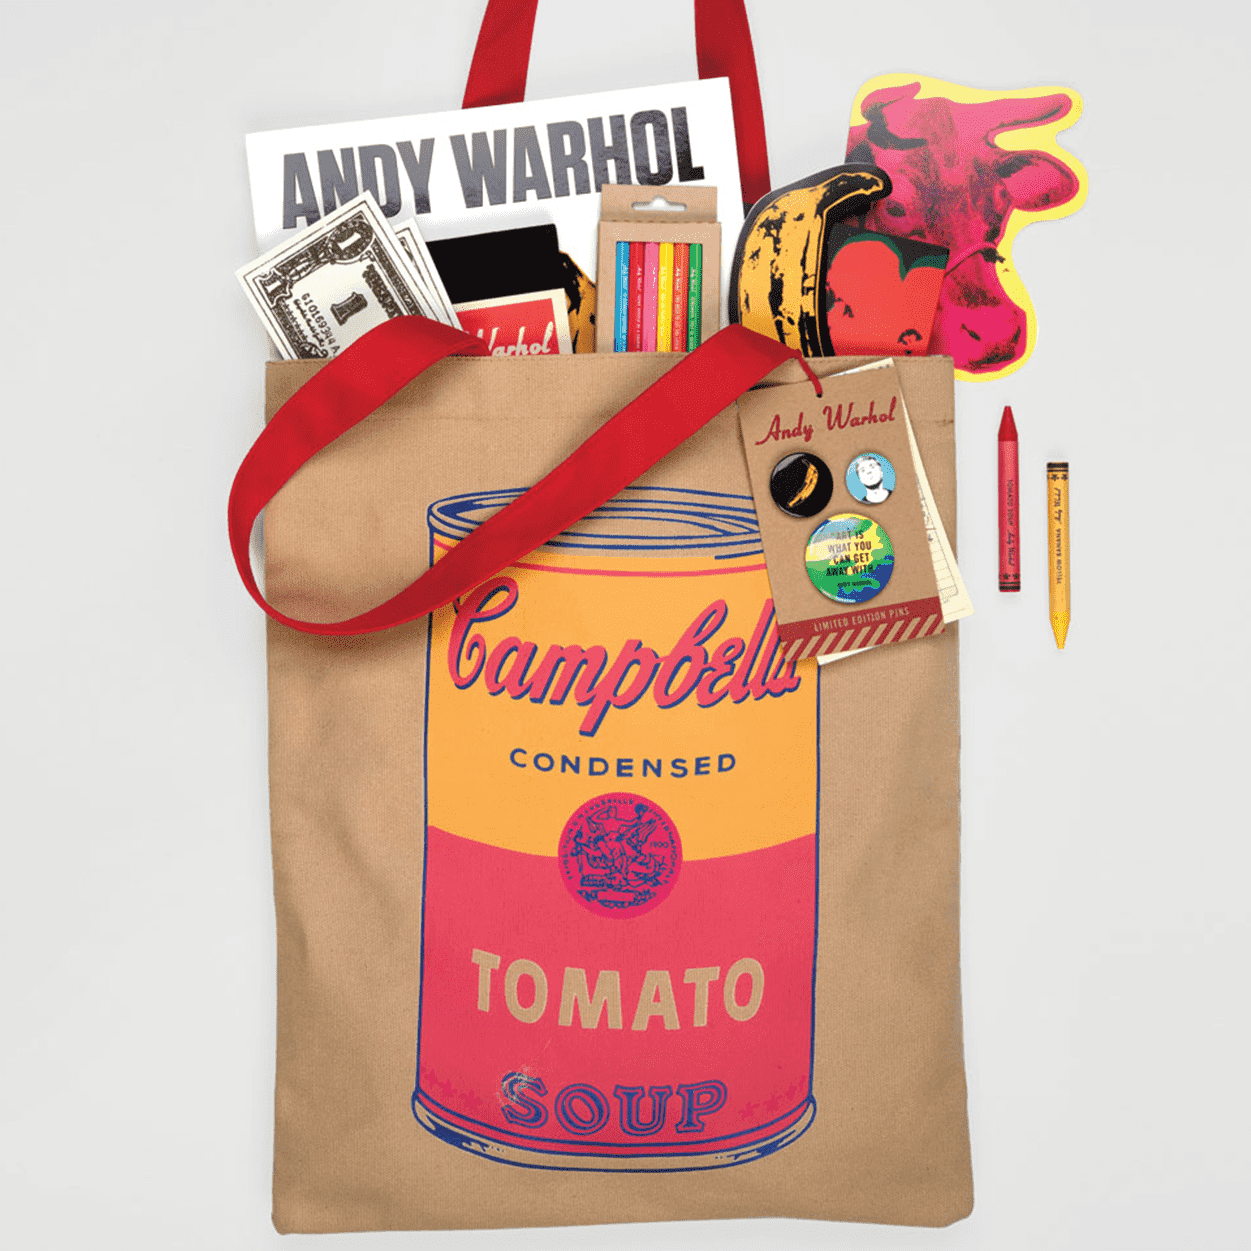 Warhol Soup Can Stress Reliever Andy Warhol Campbell's Soup Canvas Tote Bag Andy Warhol Campbell's Soup Canvas Tote Bag 